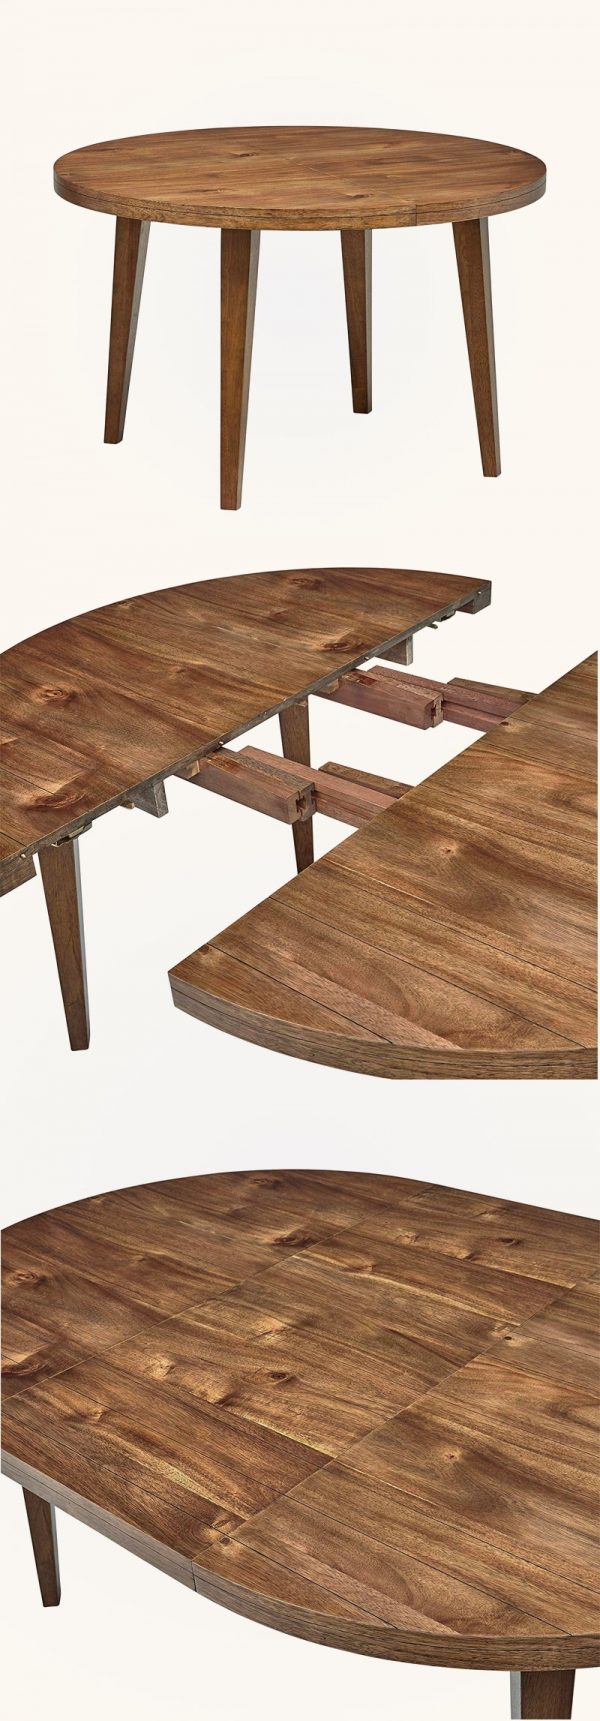 41 Extendable Dining Tables To Maximize, Round Dining Tables With Extension Leaves